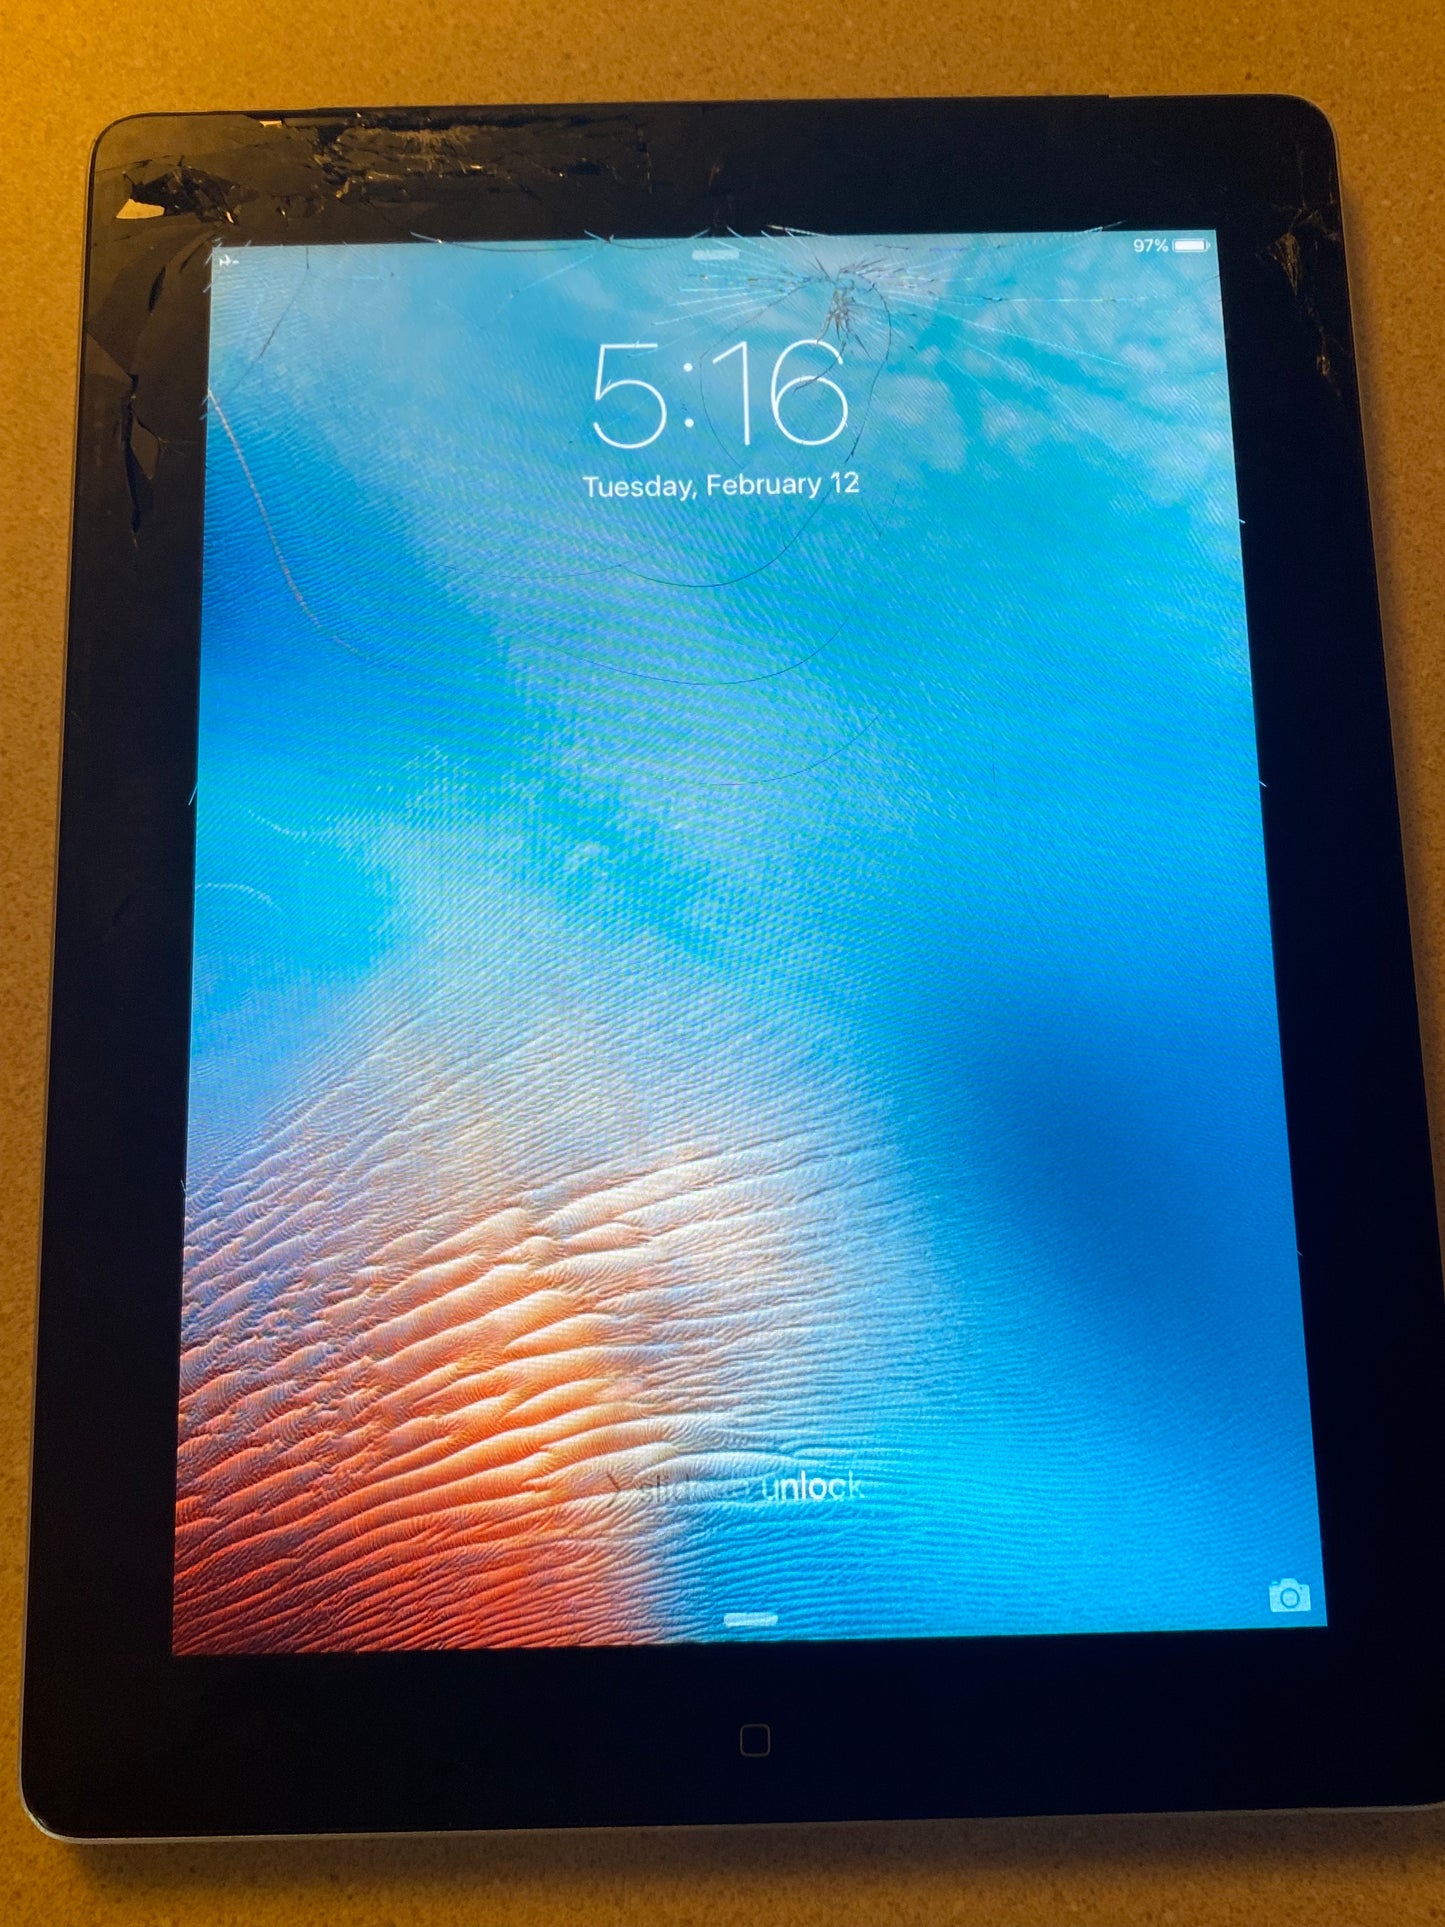 Apple iPad 2- 16GB, Wi-Fi + Cellular, AT&T 9.7" Black Cracked Screen AS-IS